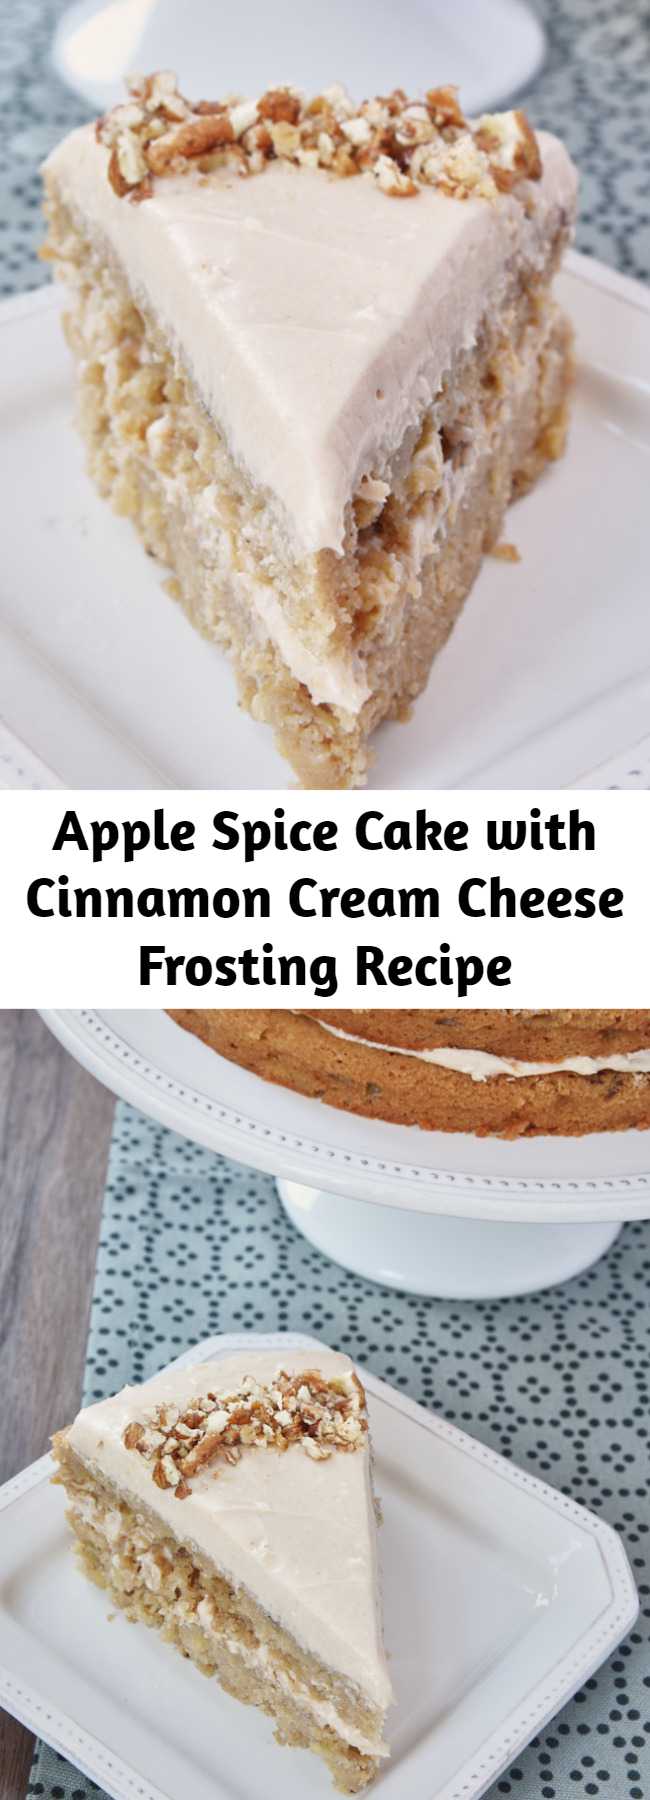 Apple Spice Cake with Cinnamon Cream Cheese Frosting Recipe - Apple Spice Cake with Cinnamon Cream Cheese Frosting is a delicious celebration of all things fall with lots of apples and fall spices.